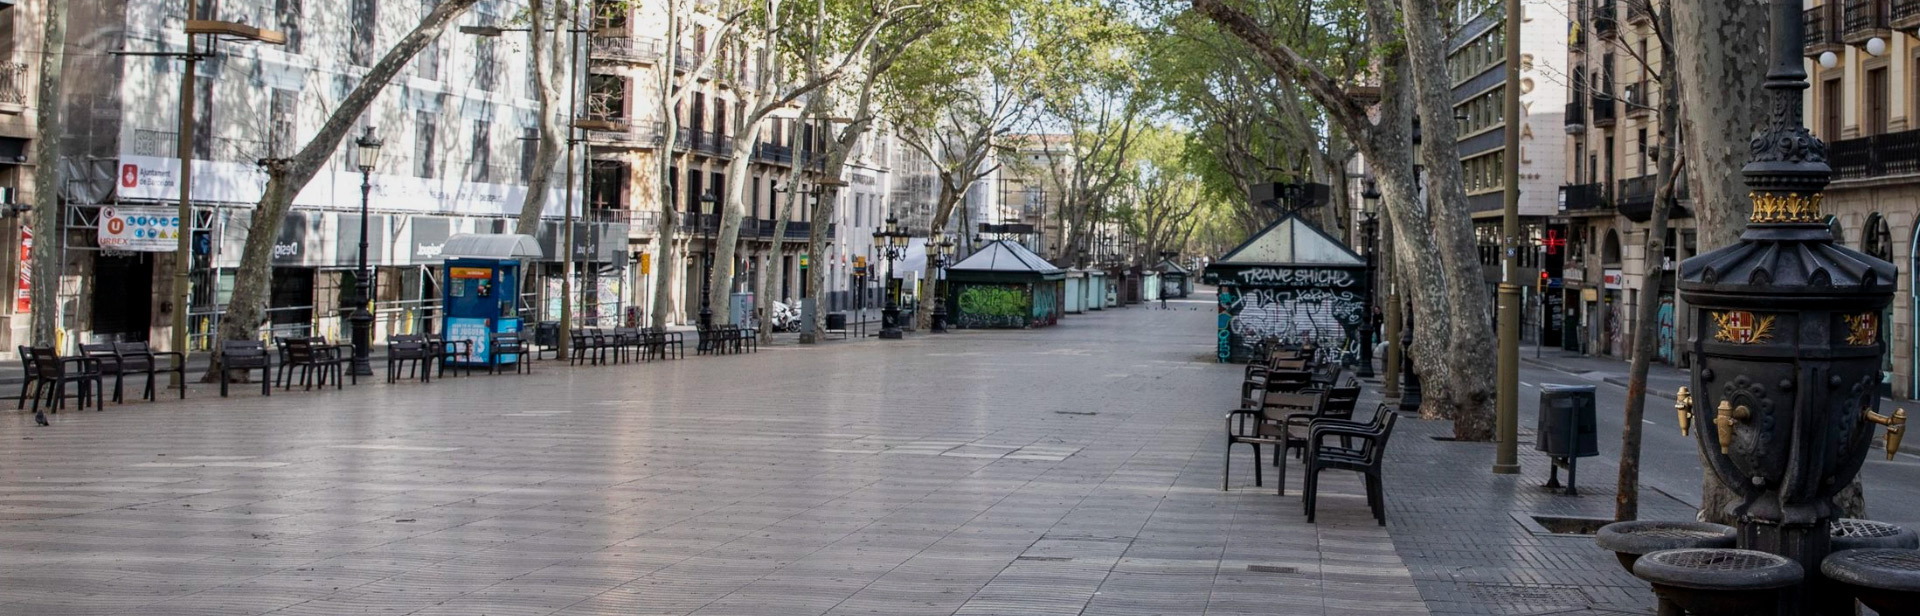 La Rambla at the height of the Fountain of Canaletes completely empty